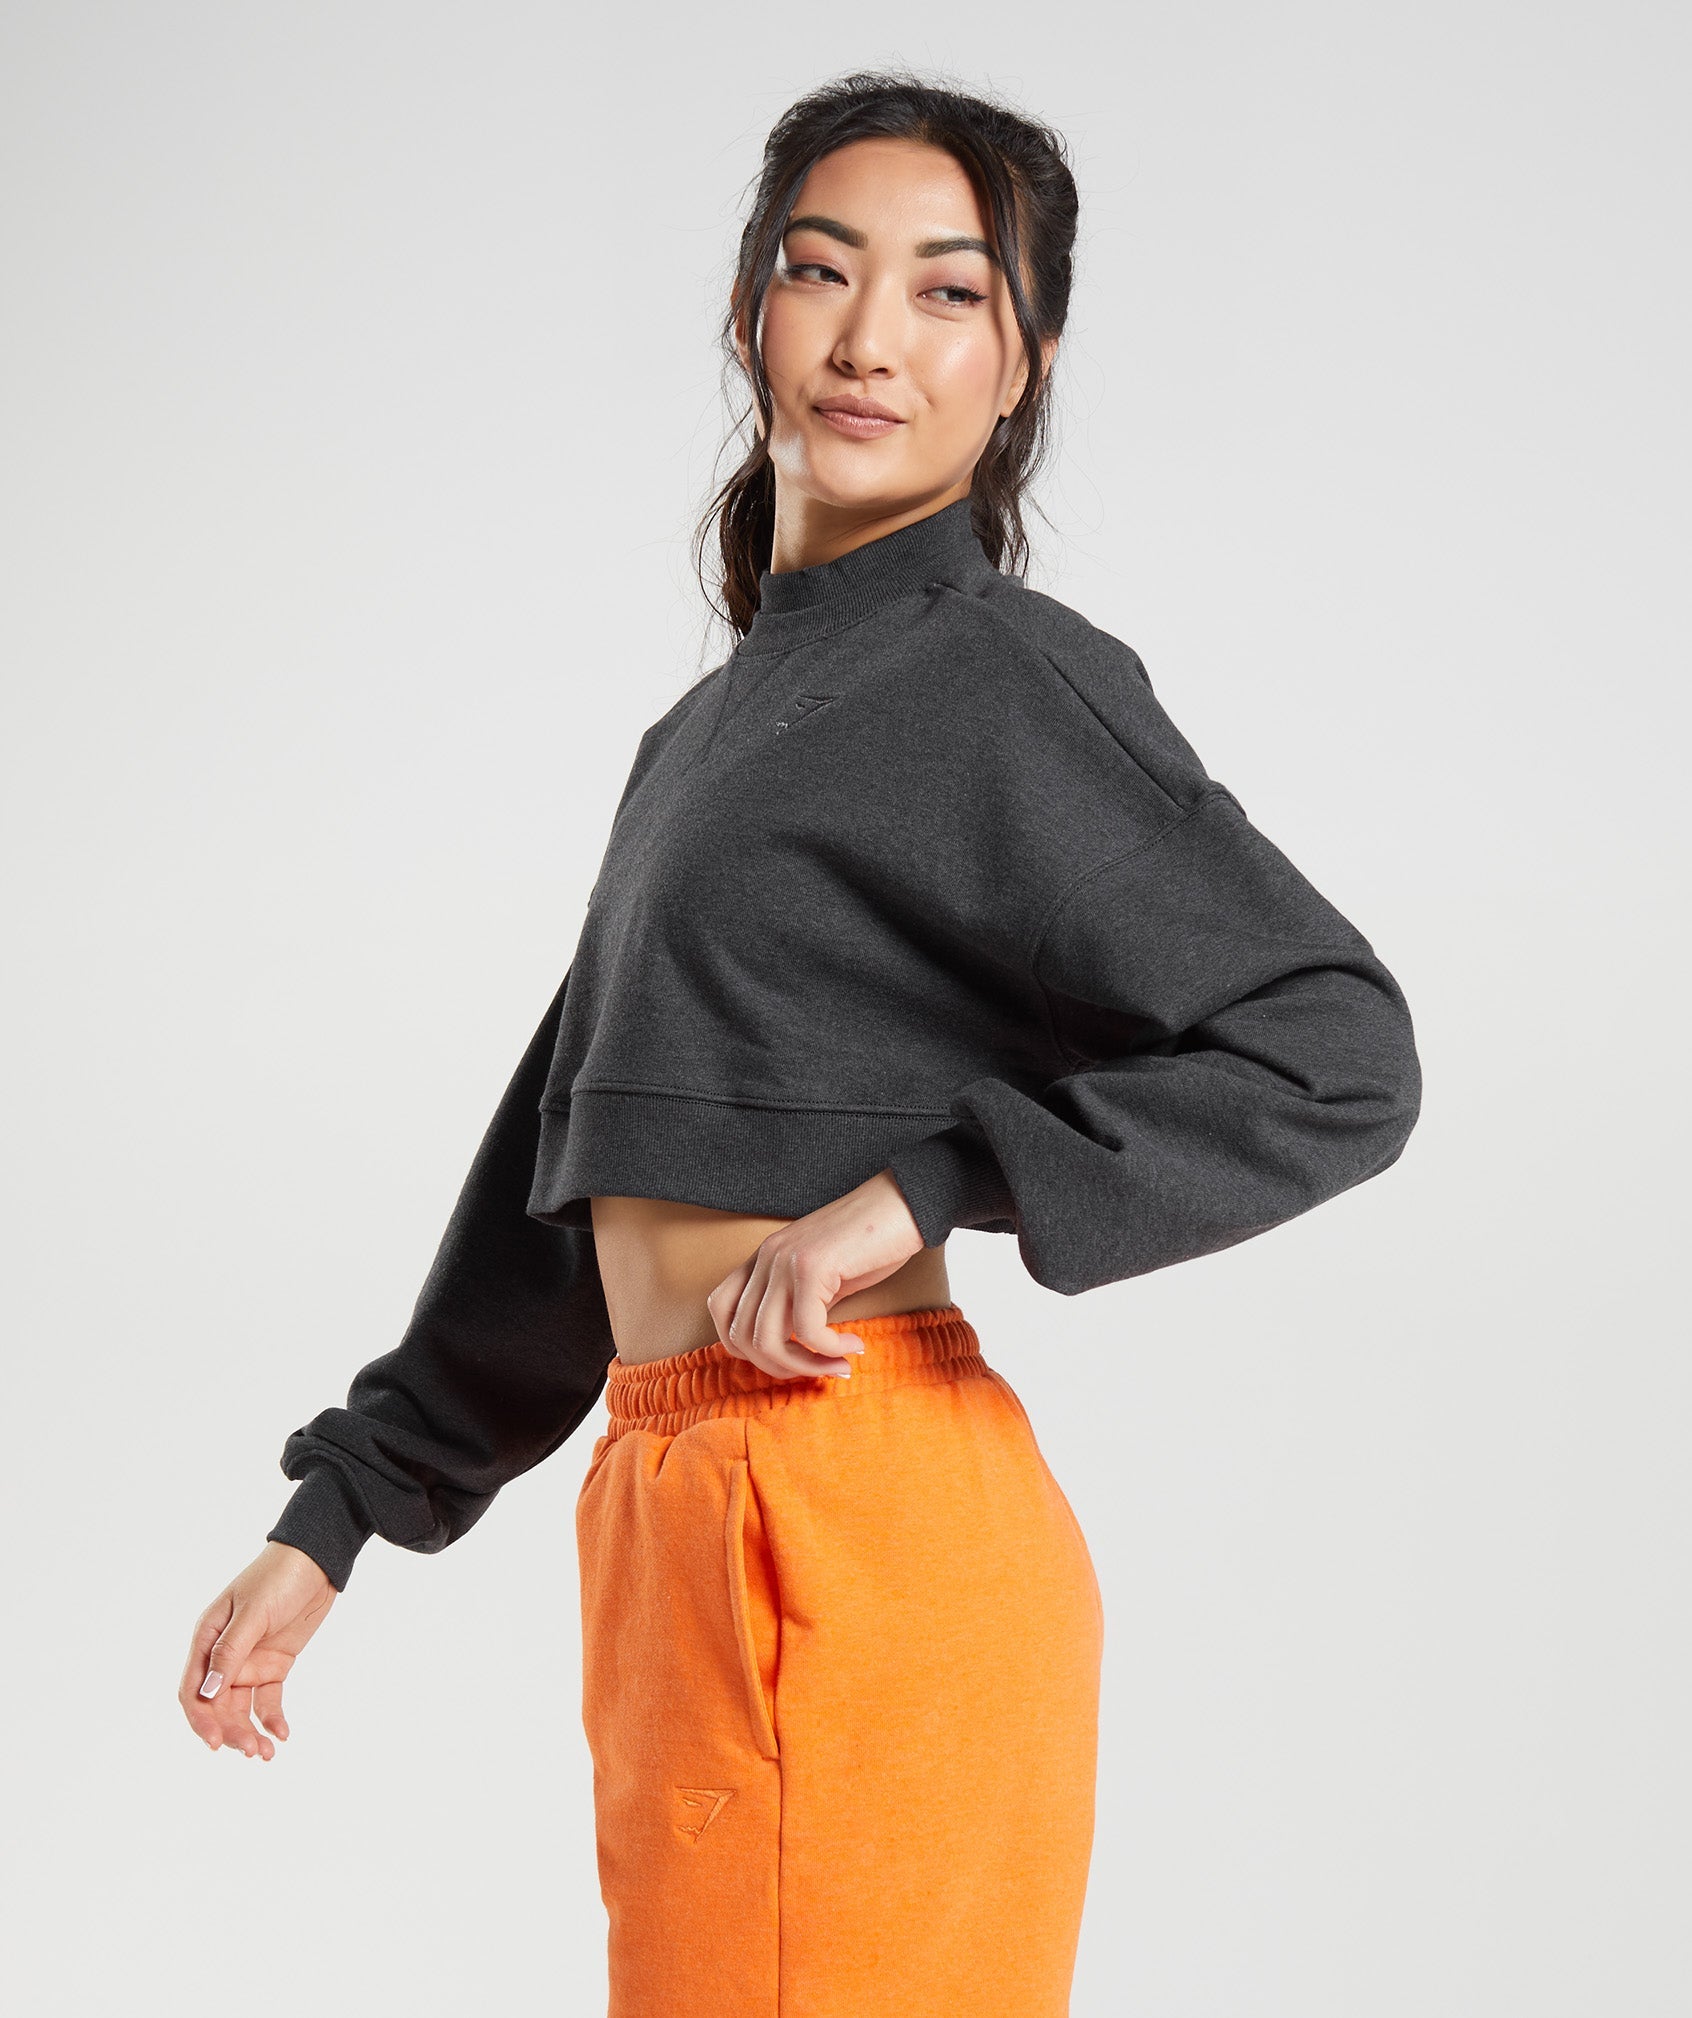 Rest Day Sweats Cropped Pullover product image 3